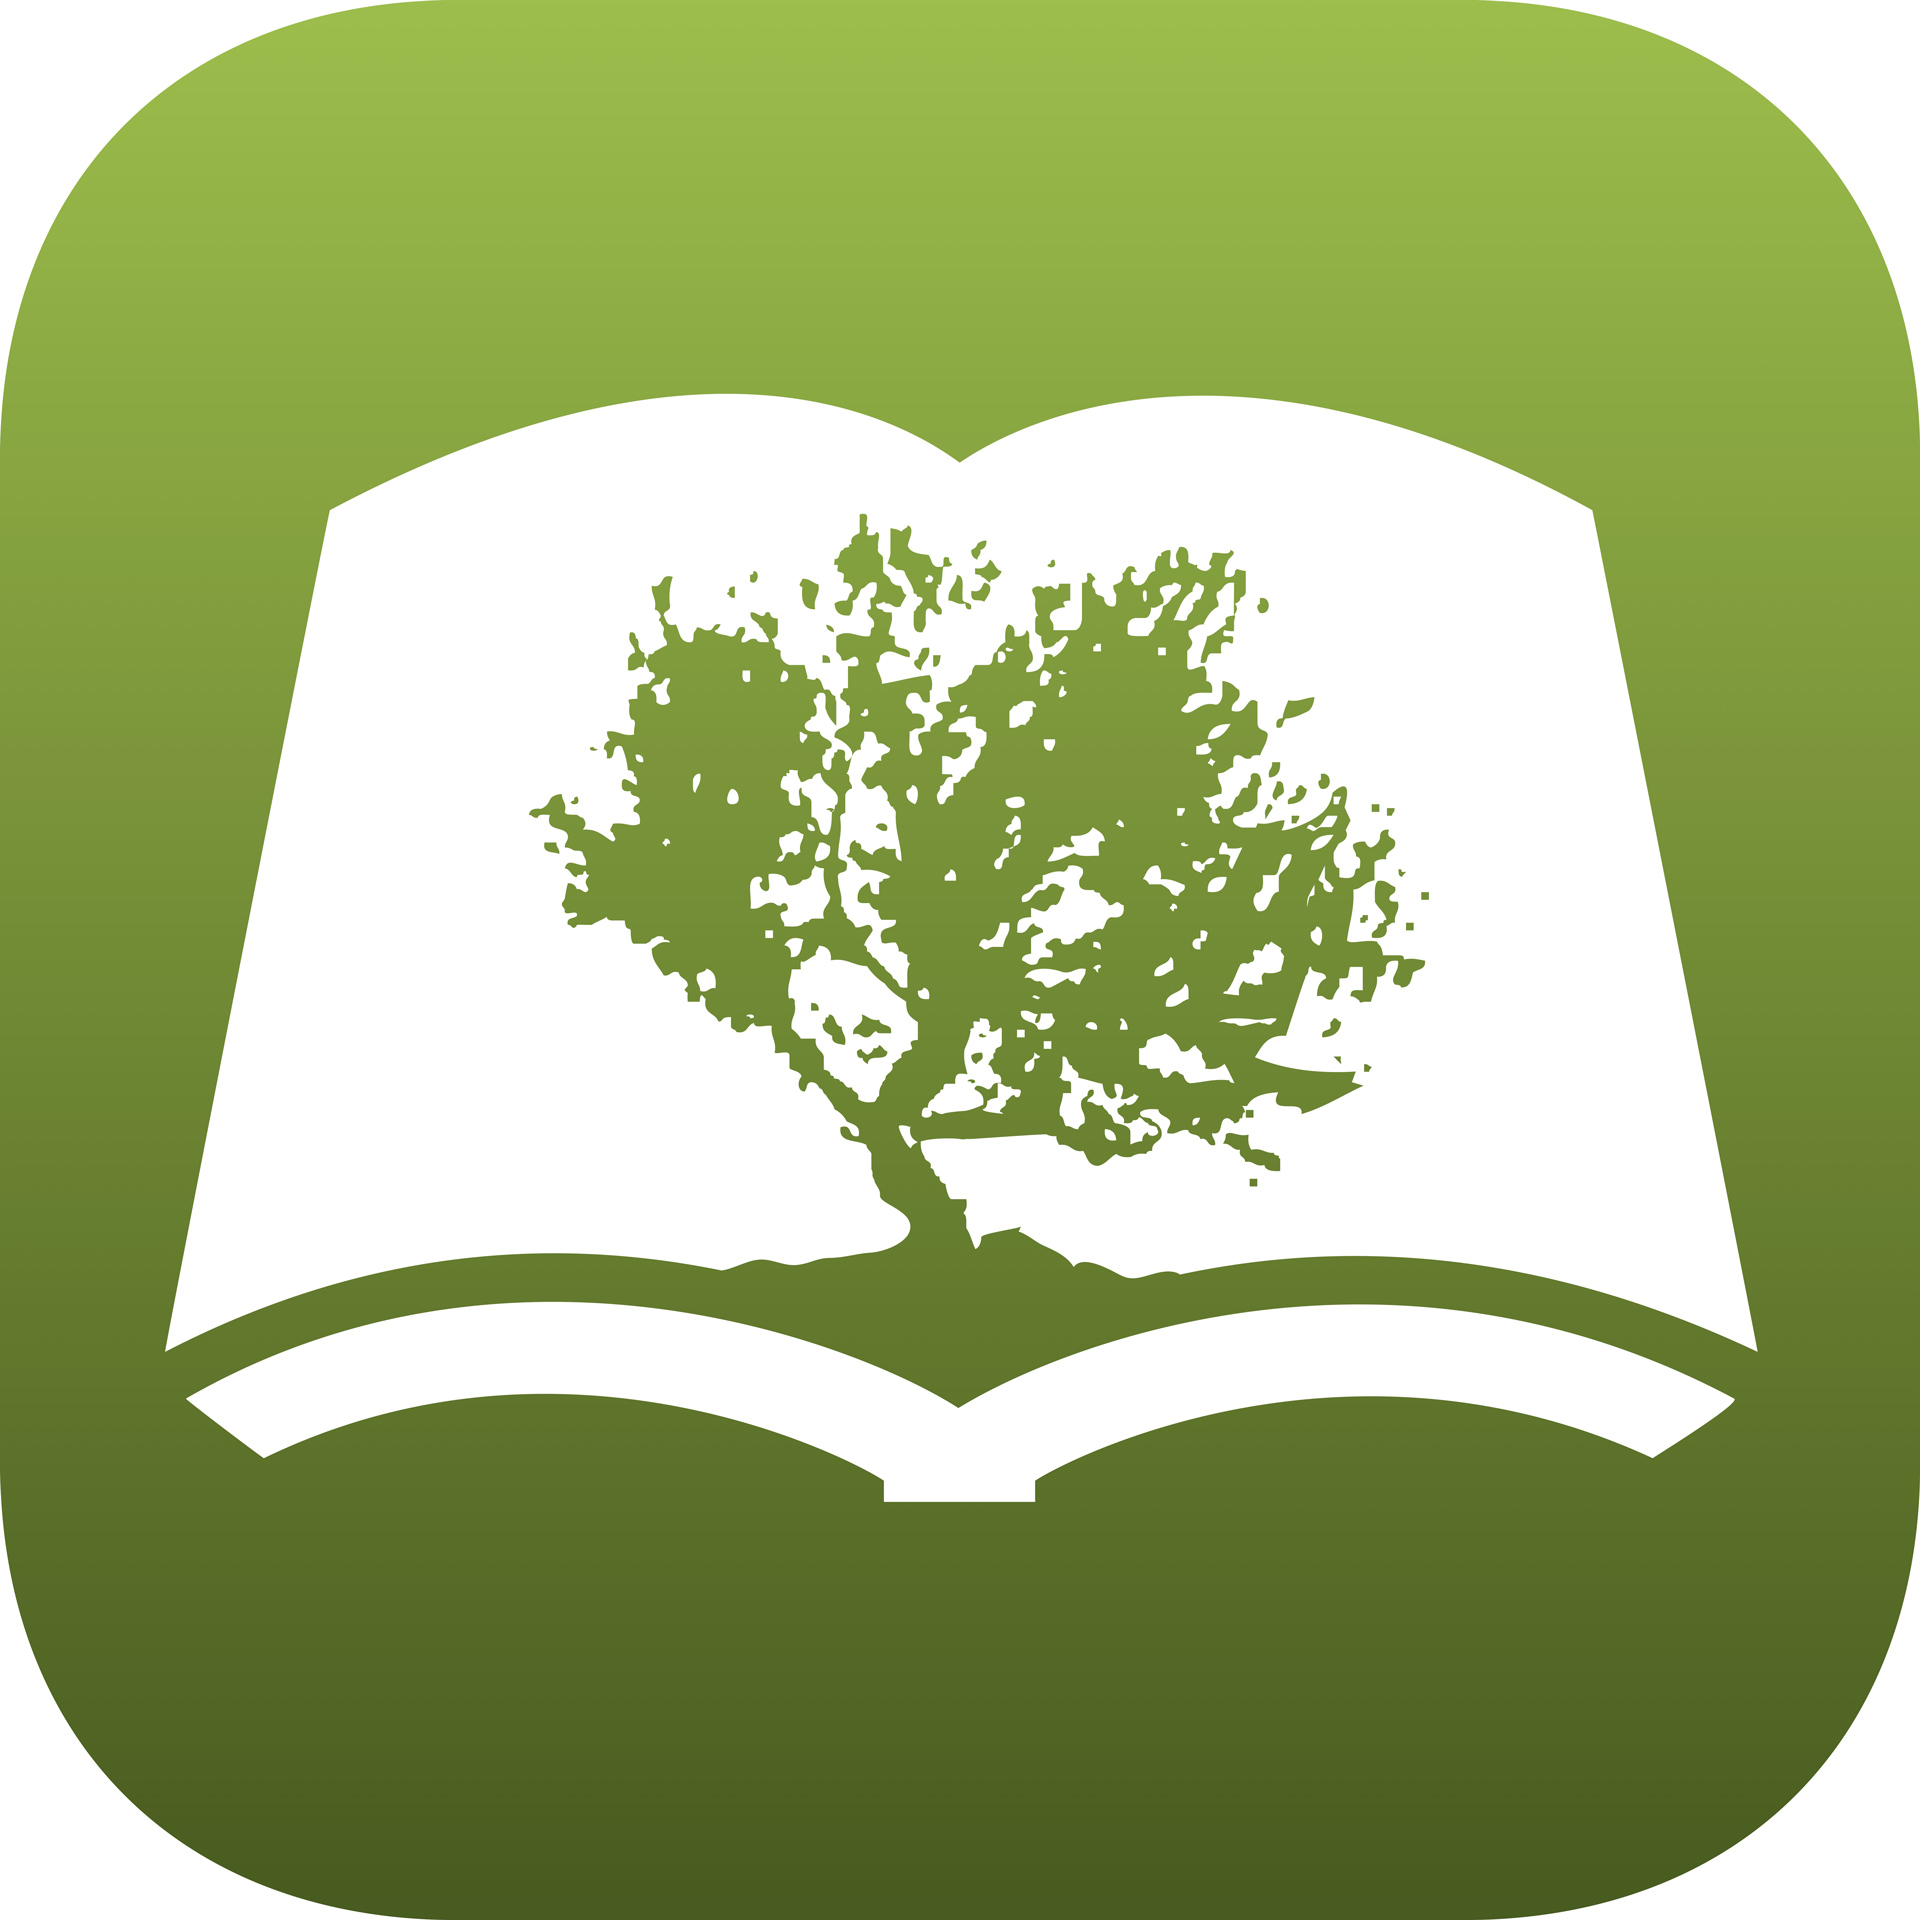 olive tree bible software free download